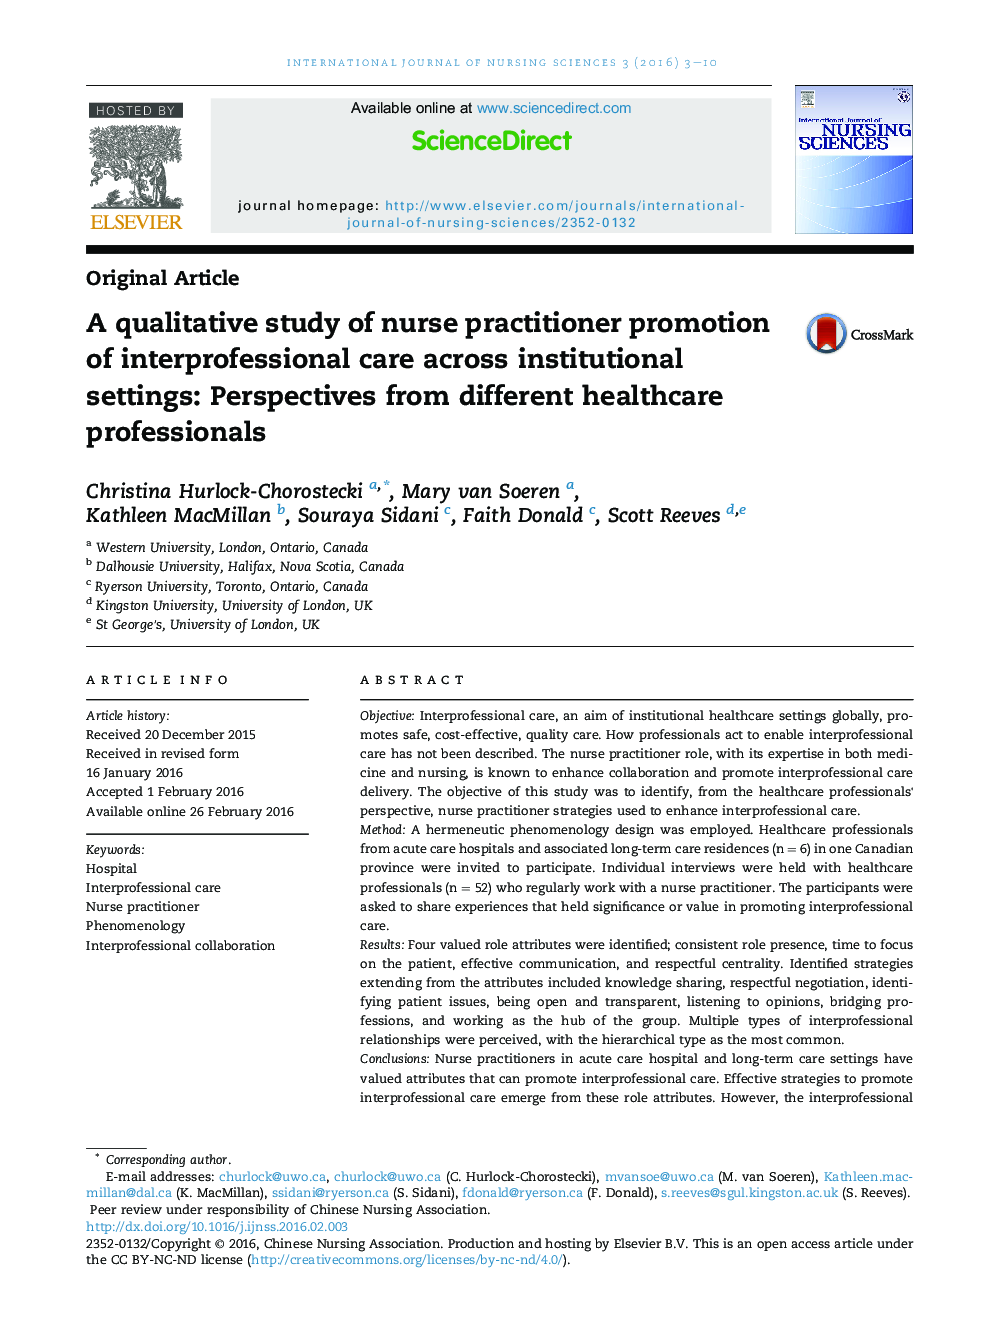 A qualitative study of nurse practitioner promotion of interprofessional care across institutional settings: Perspectives from different healthcare professionals 